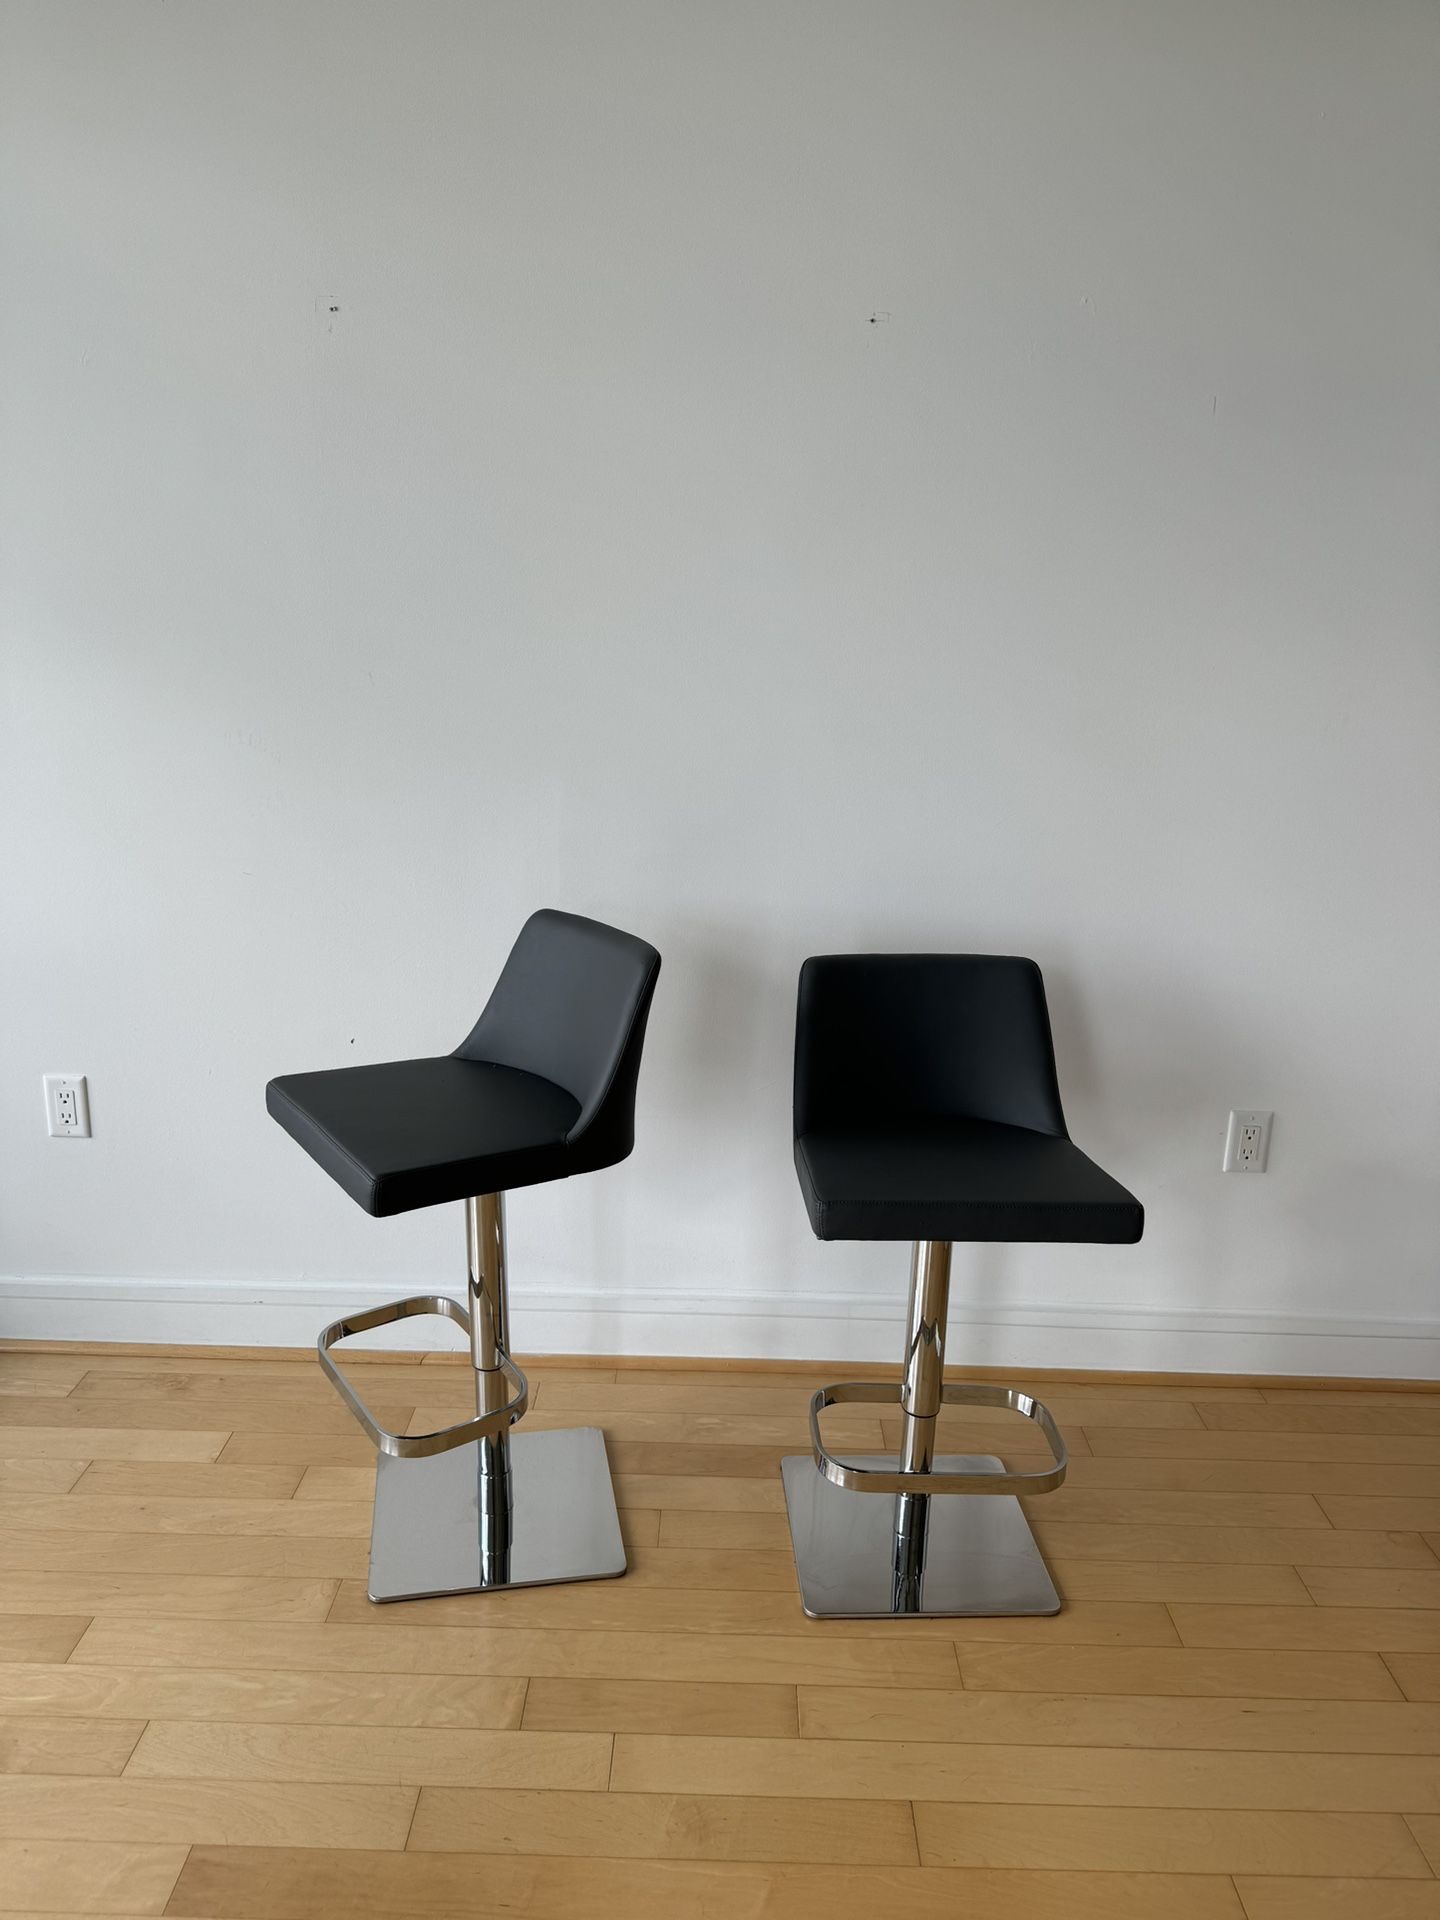 Two Adjustable Height Bar Stools $120 